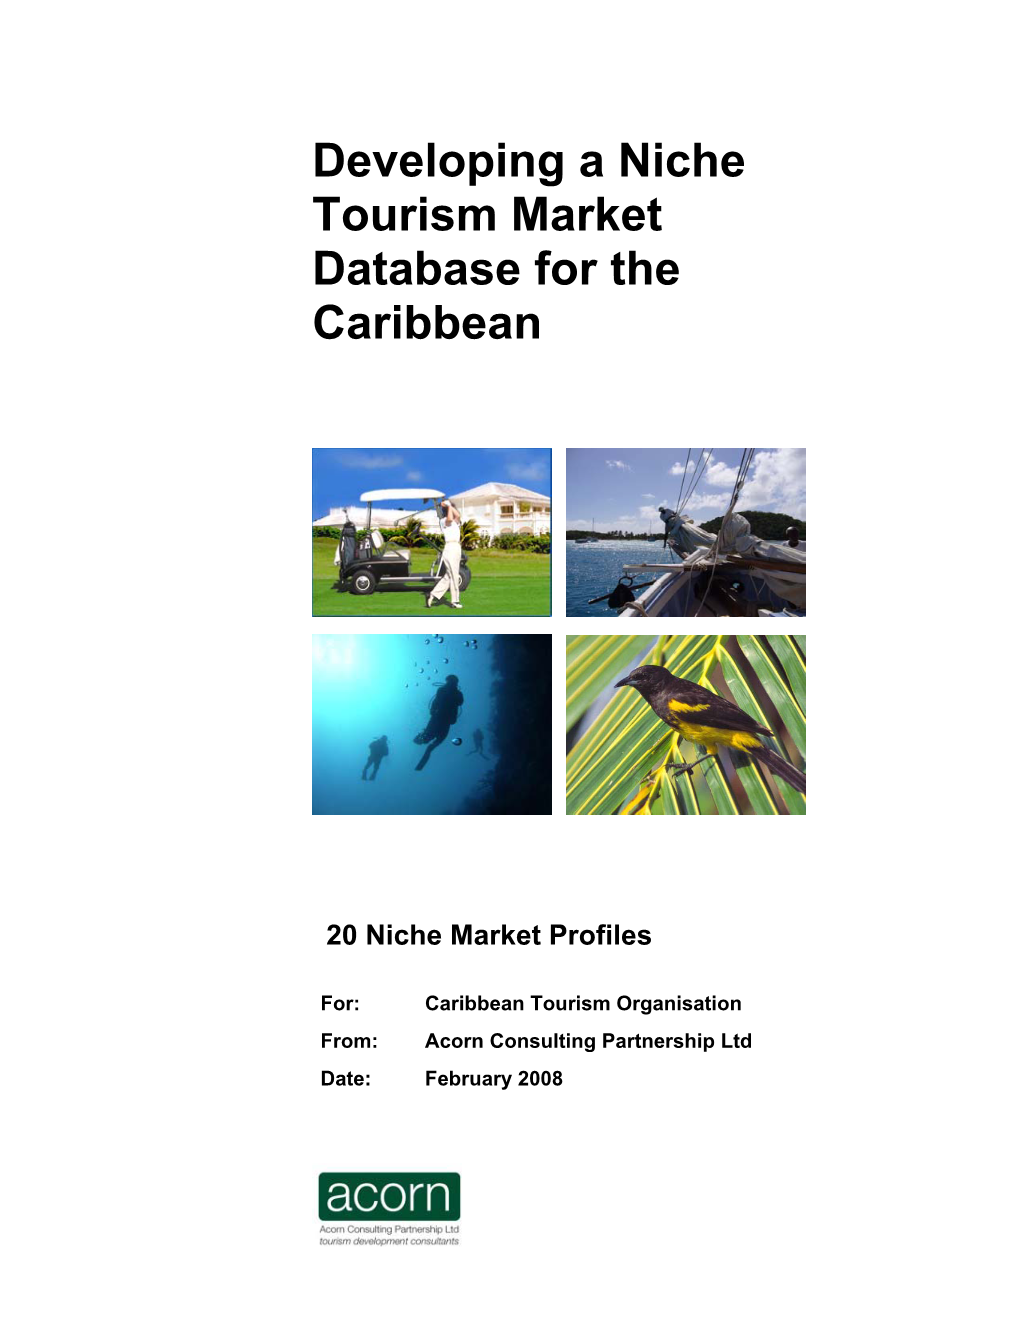 Developing a Niche Tourism Market Database for the Caribbean